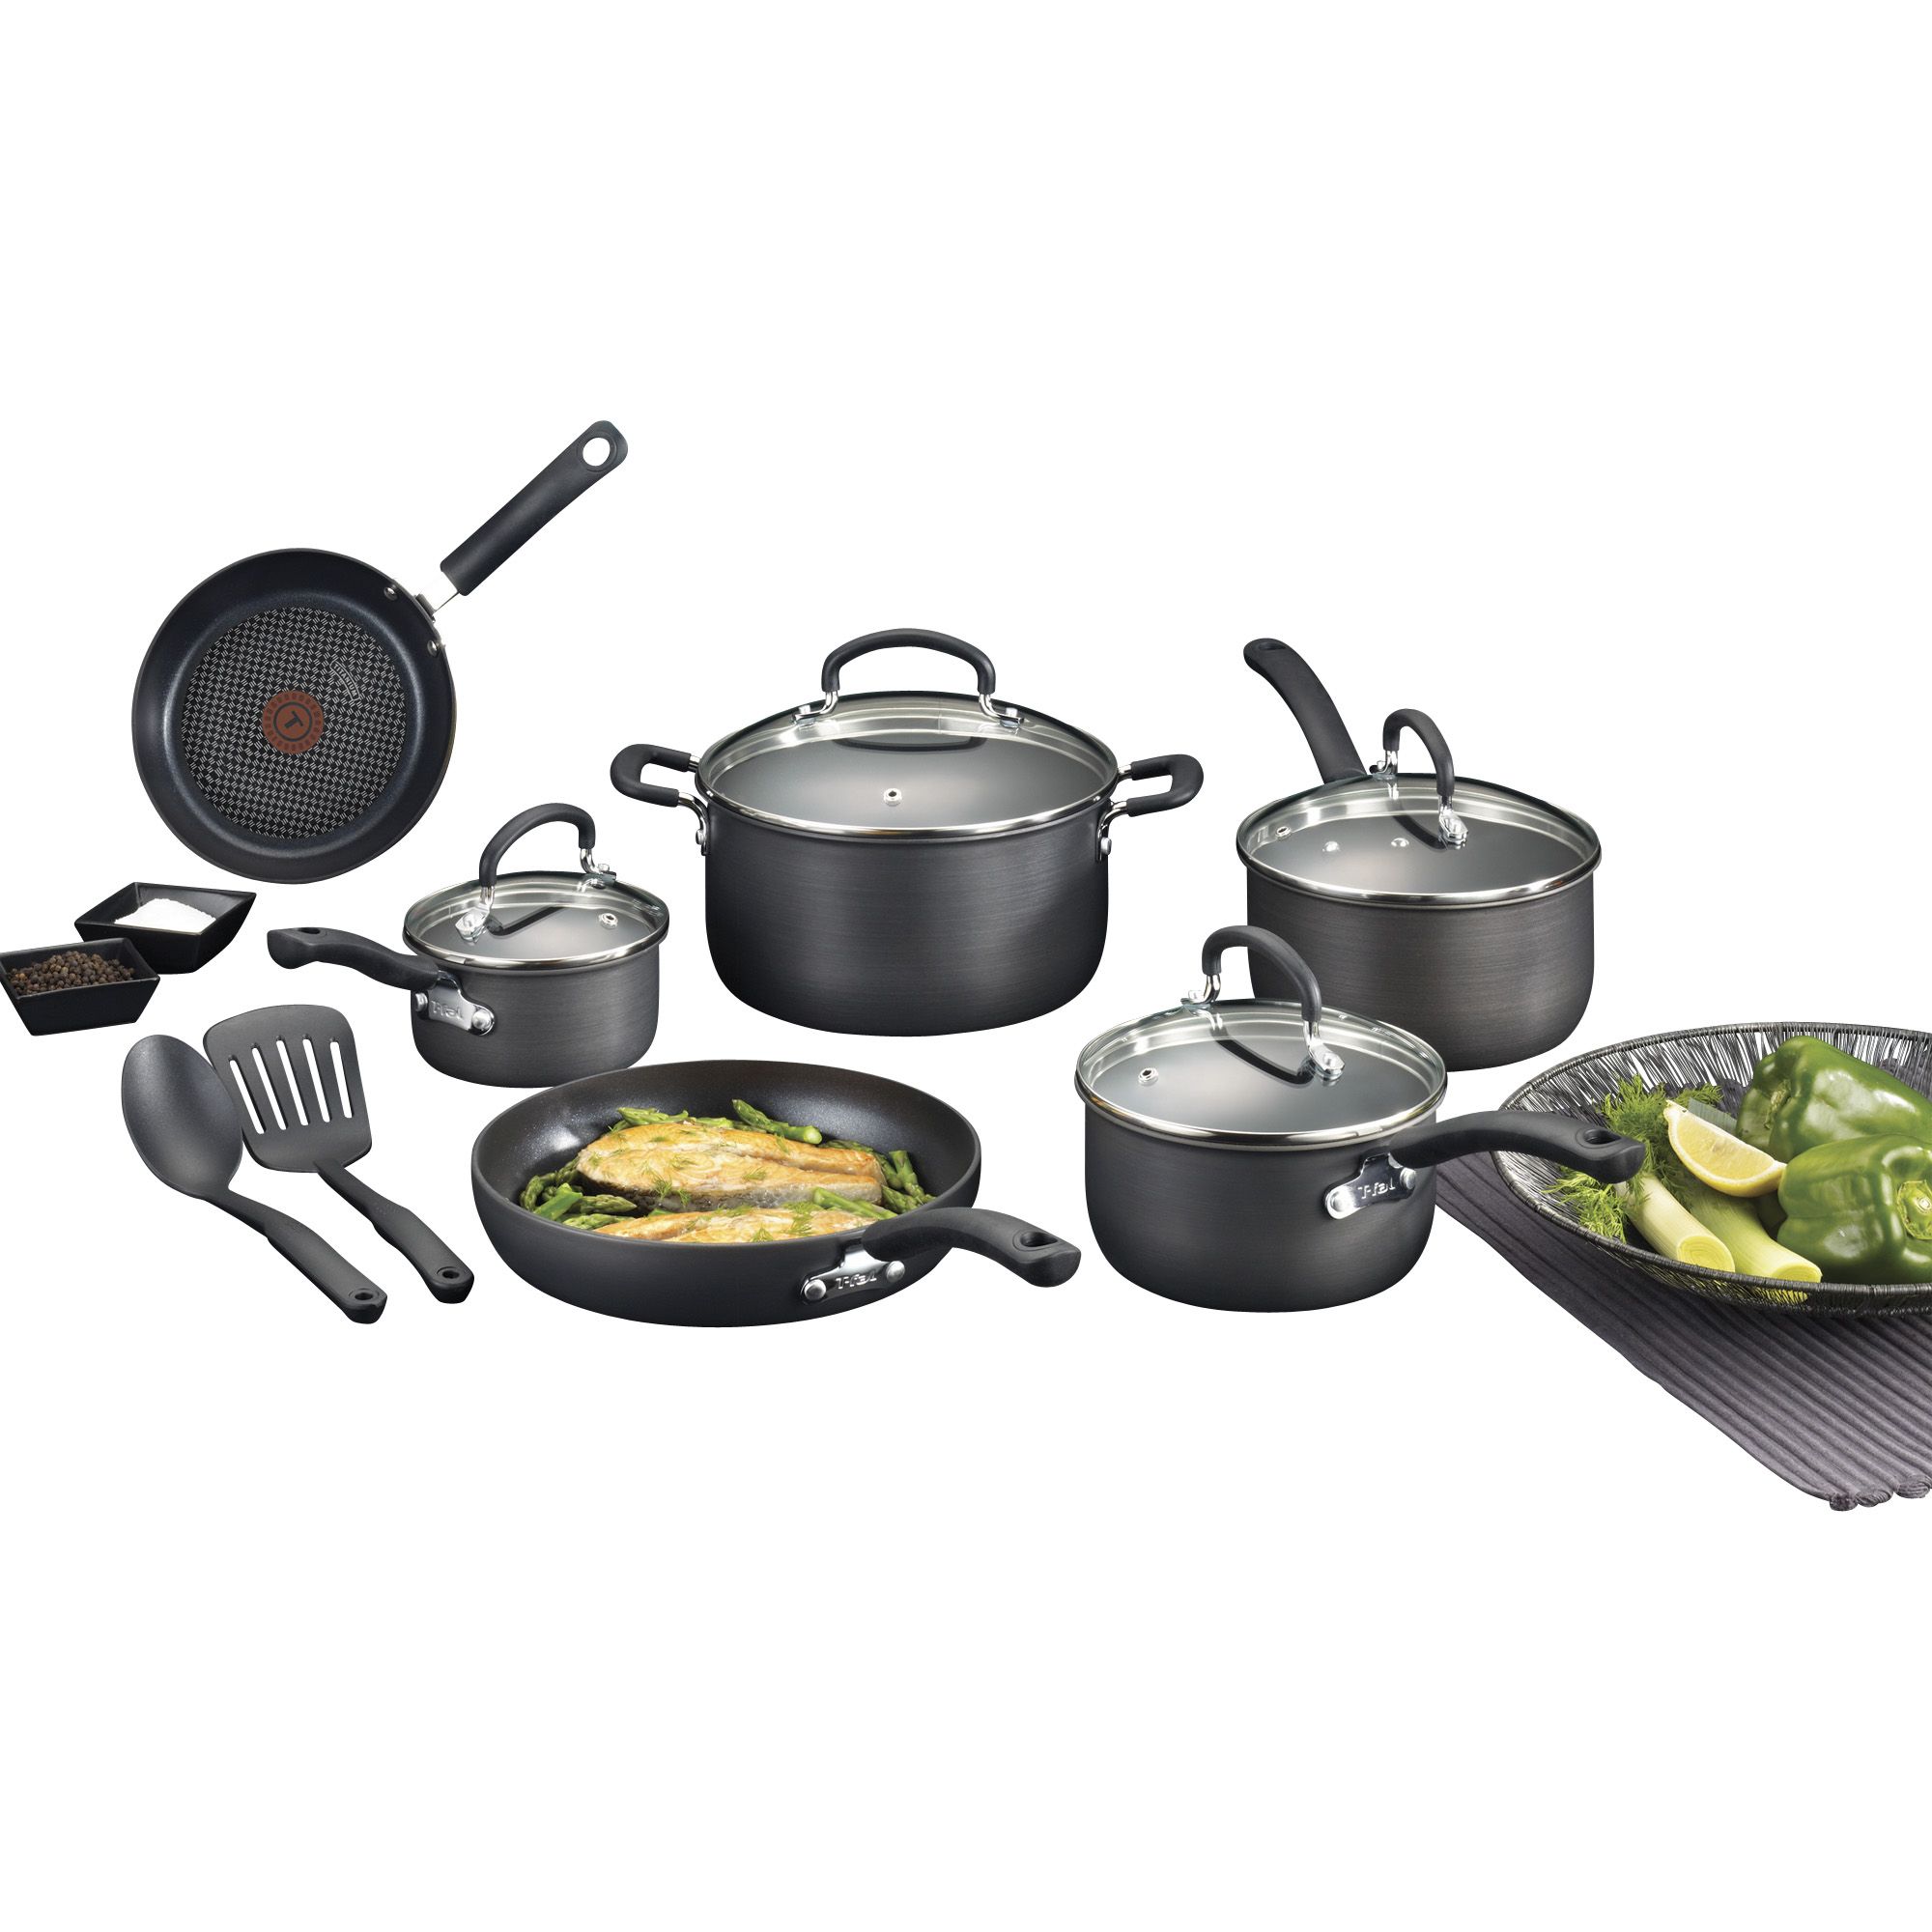 T-fal t-fal ultimate hard anodized nonstick cookware set 12 piece